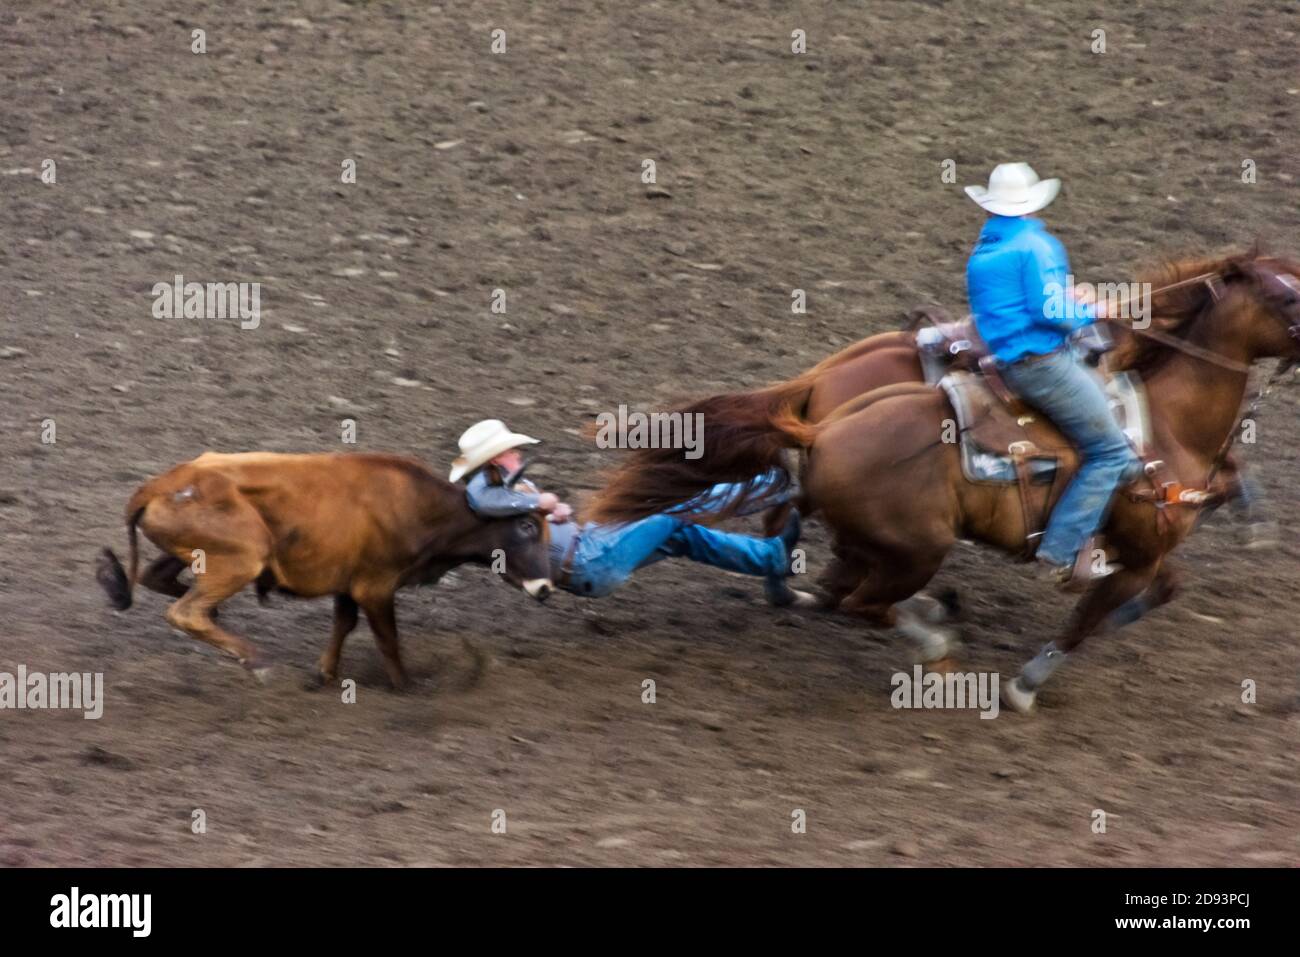 Rodeo show in the arena, steer wrestling where a rider chases a steer, drops from the horse to the steer, then wrestles the steer to the ground by gra Stock Photo